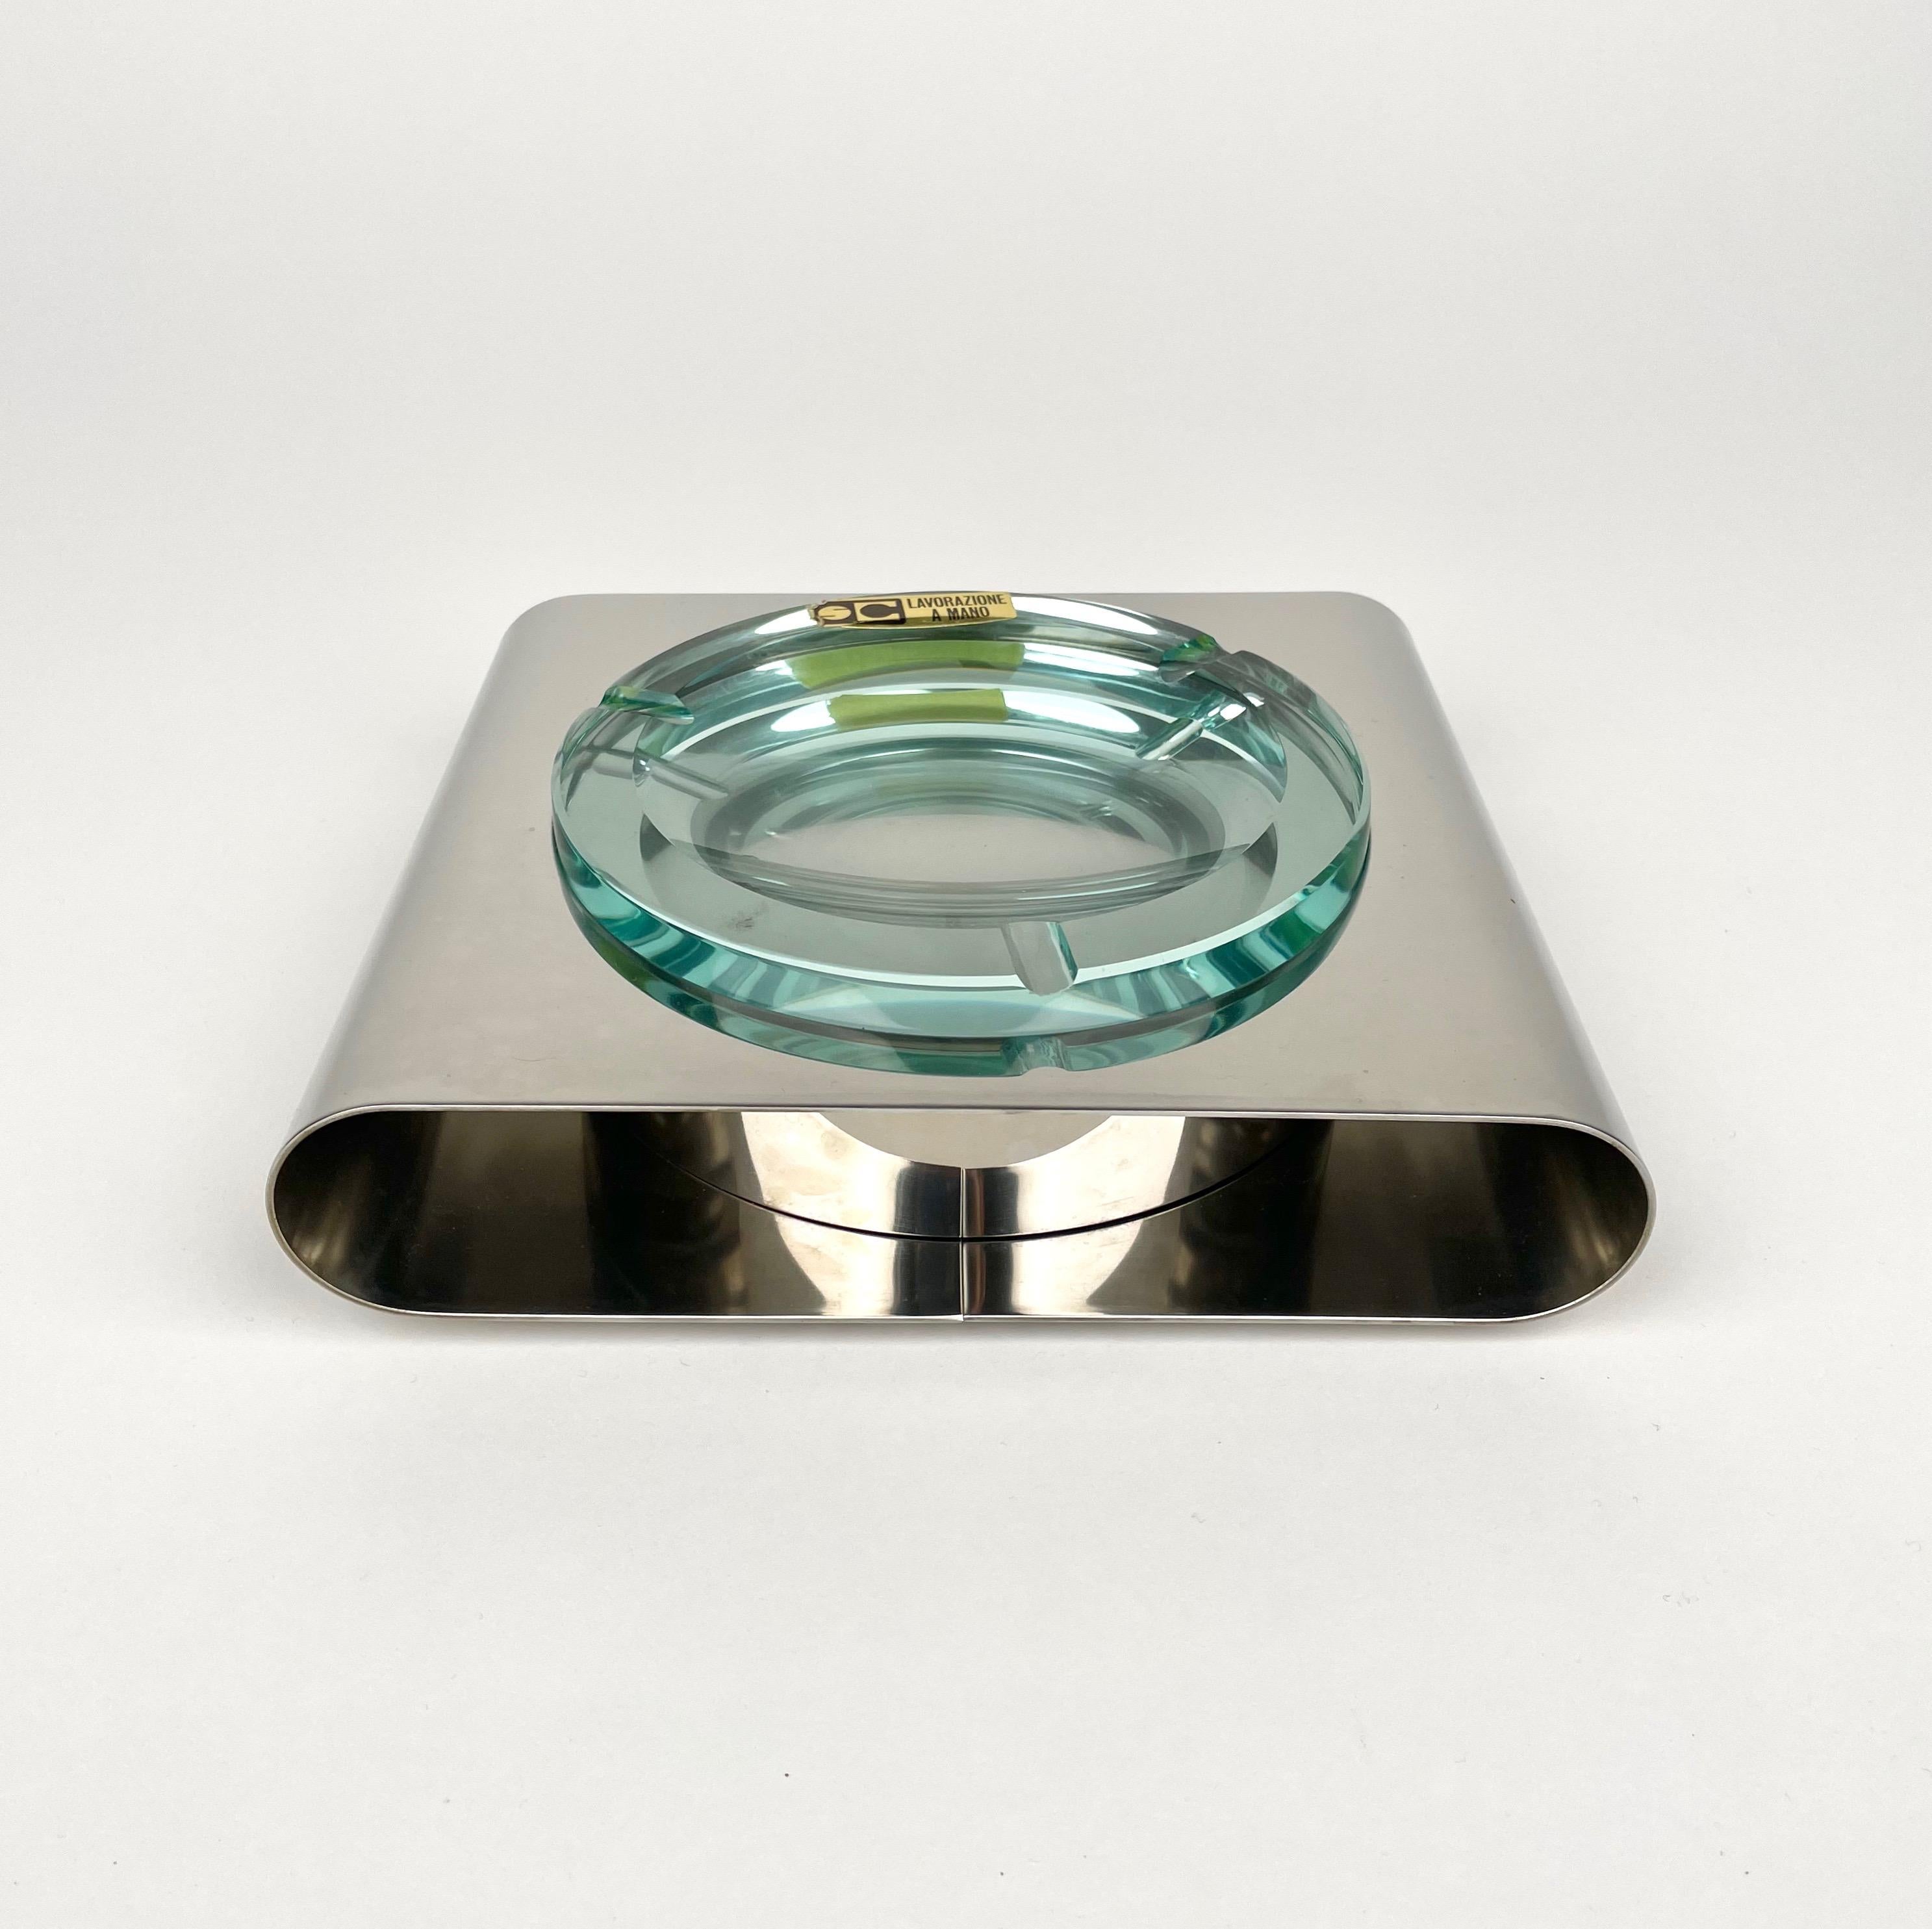 Mid-Century Modern Ashtray Sena Cristal Steel and Green Glass, Italy, 1970s For Sale